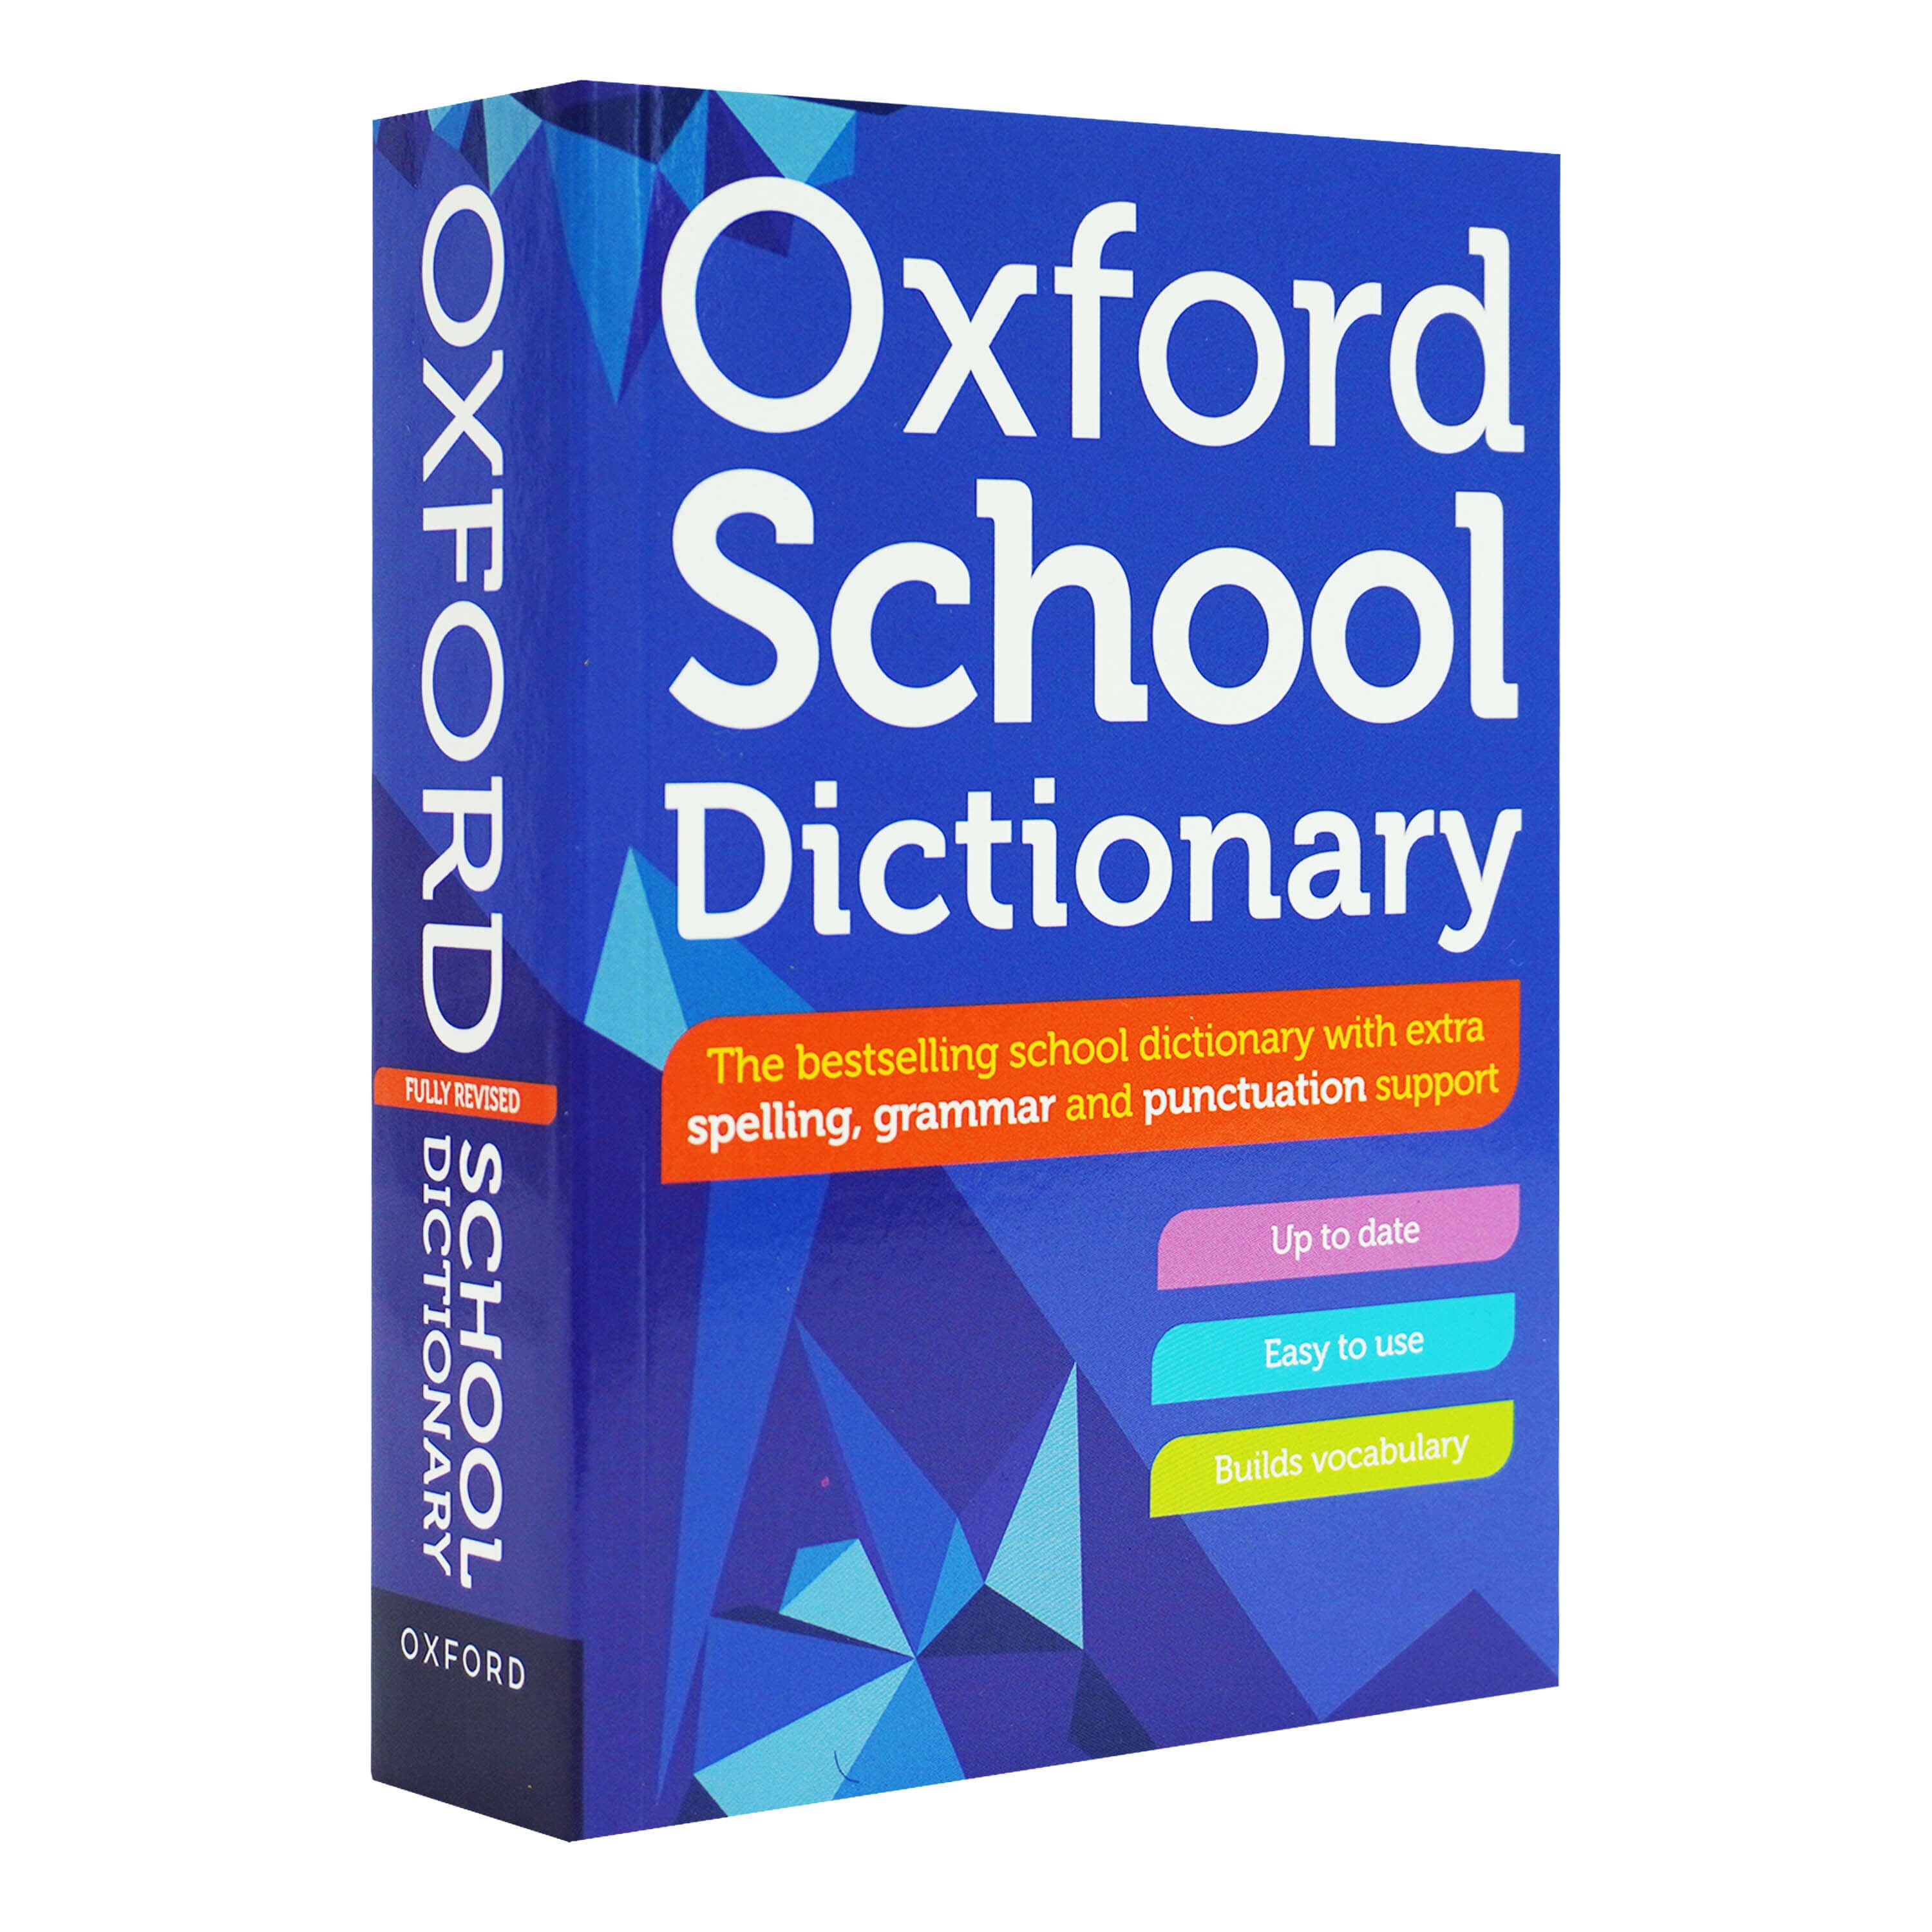 —　Dictionary　Age　Oxford　School　By　Pa　English　10+　Dictionaries　Oxford　Books2Door